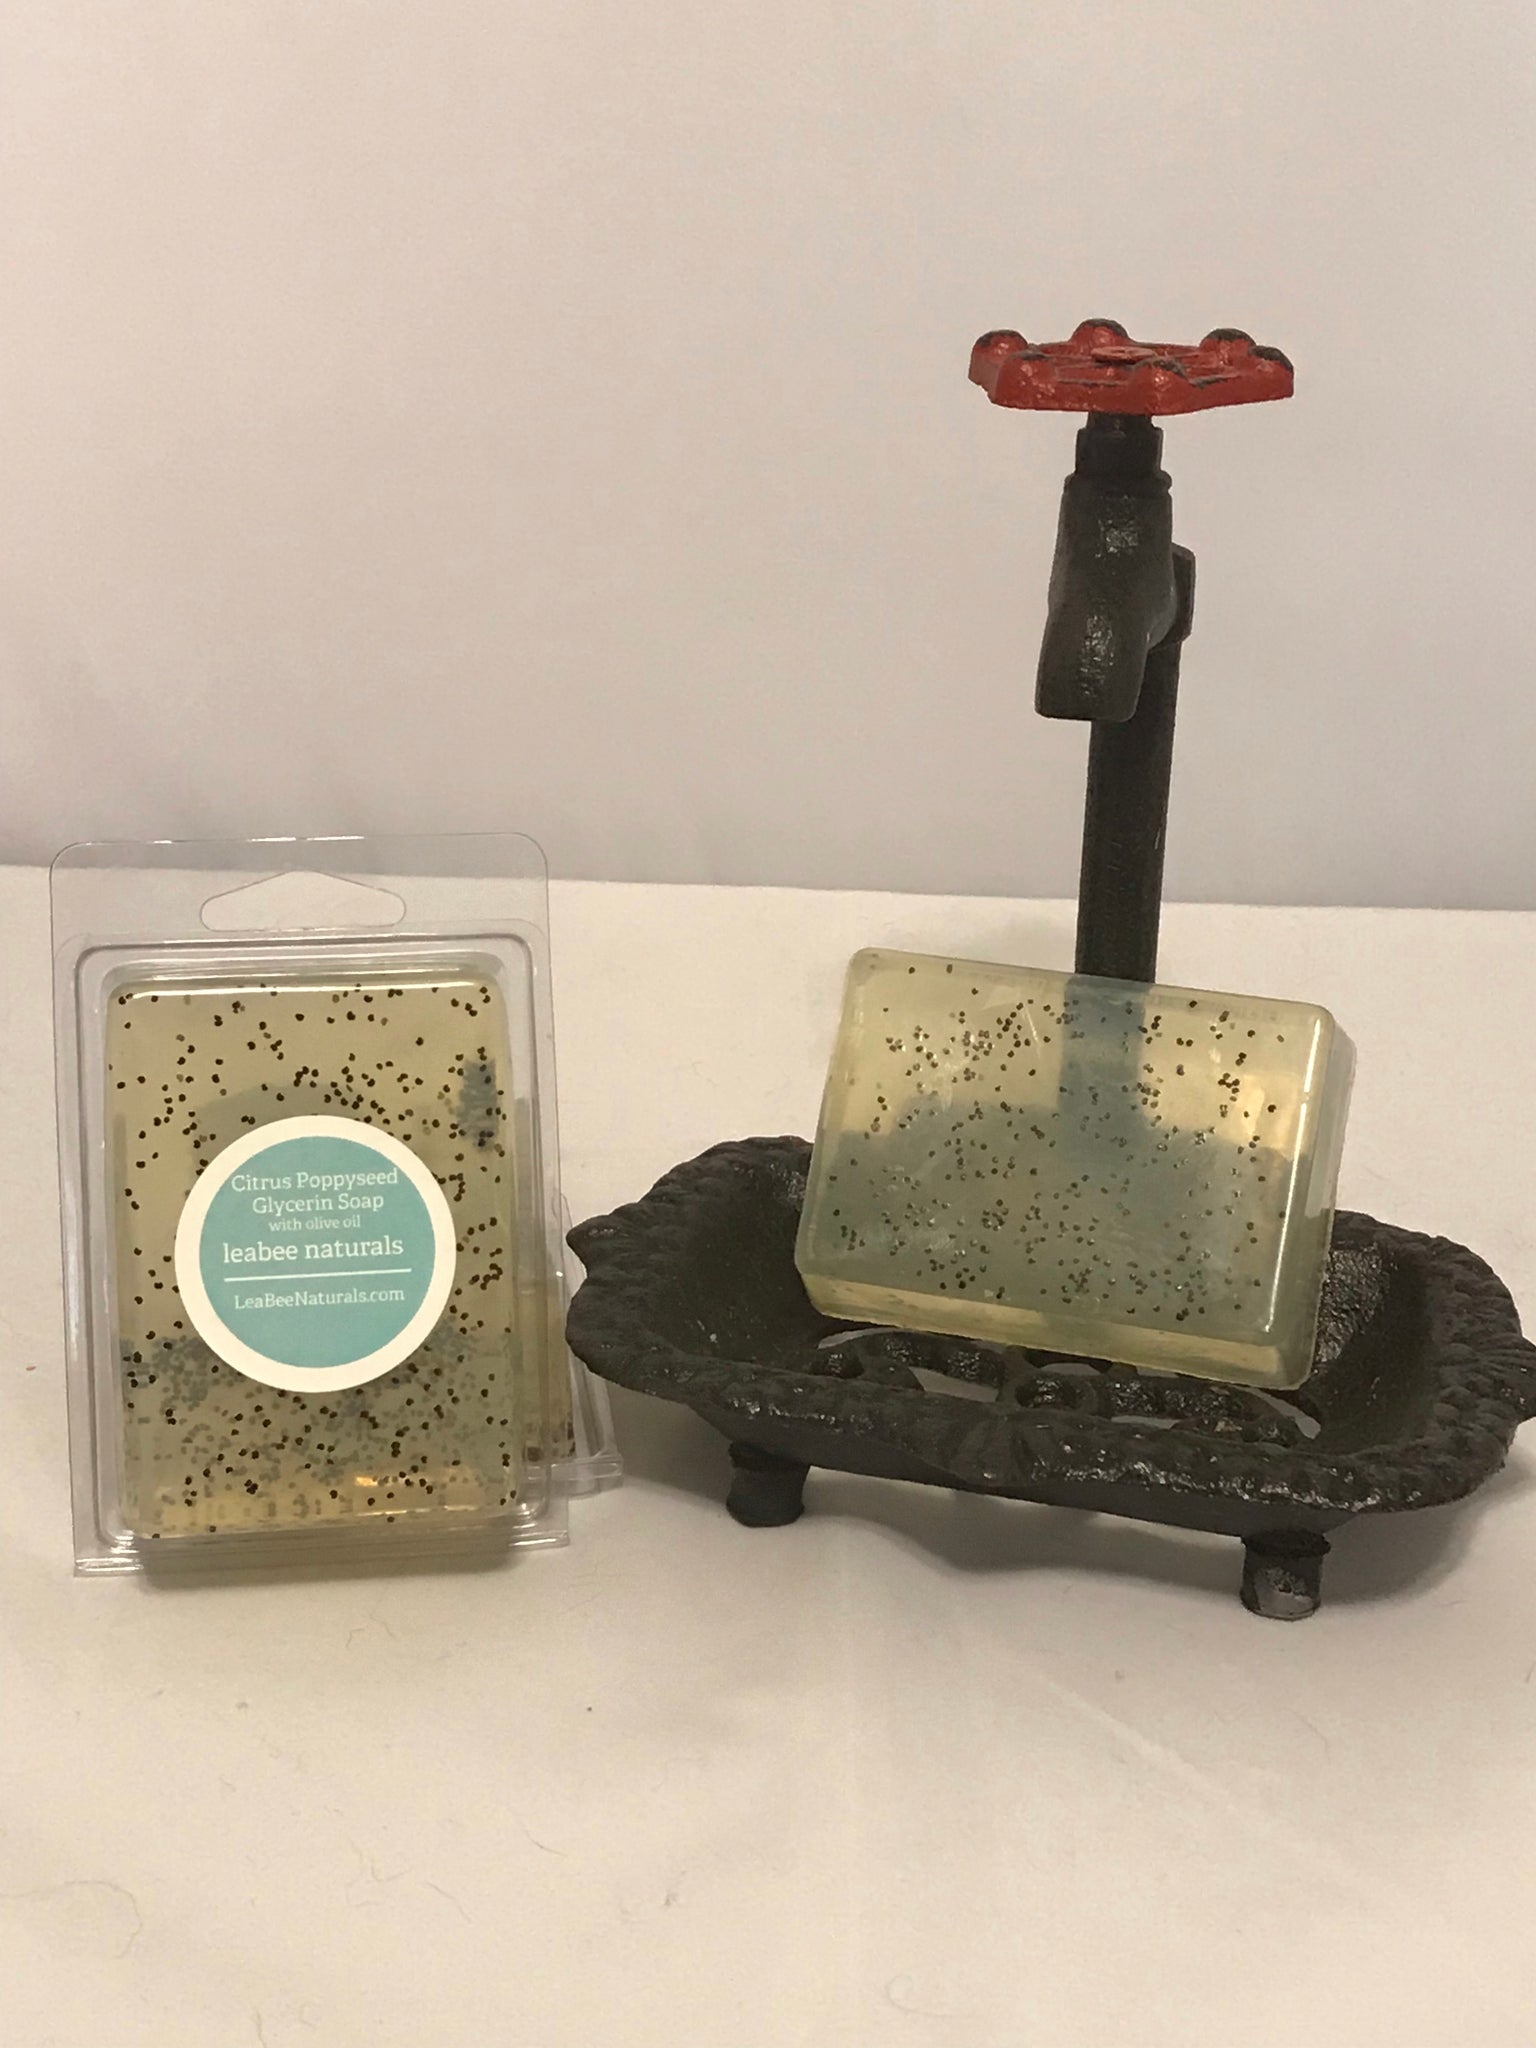 Citrus Poppyseed Soap with Olive Oil - Perfect facial cleanser! Great for sensitive skin!